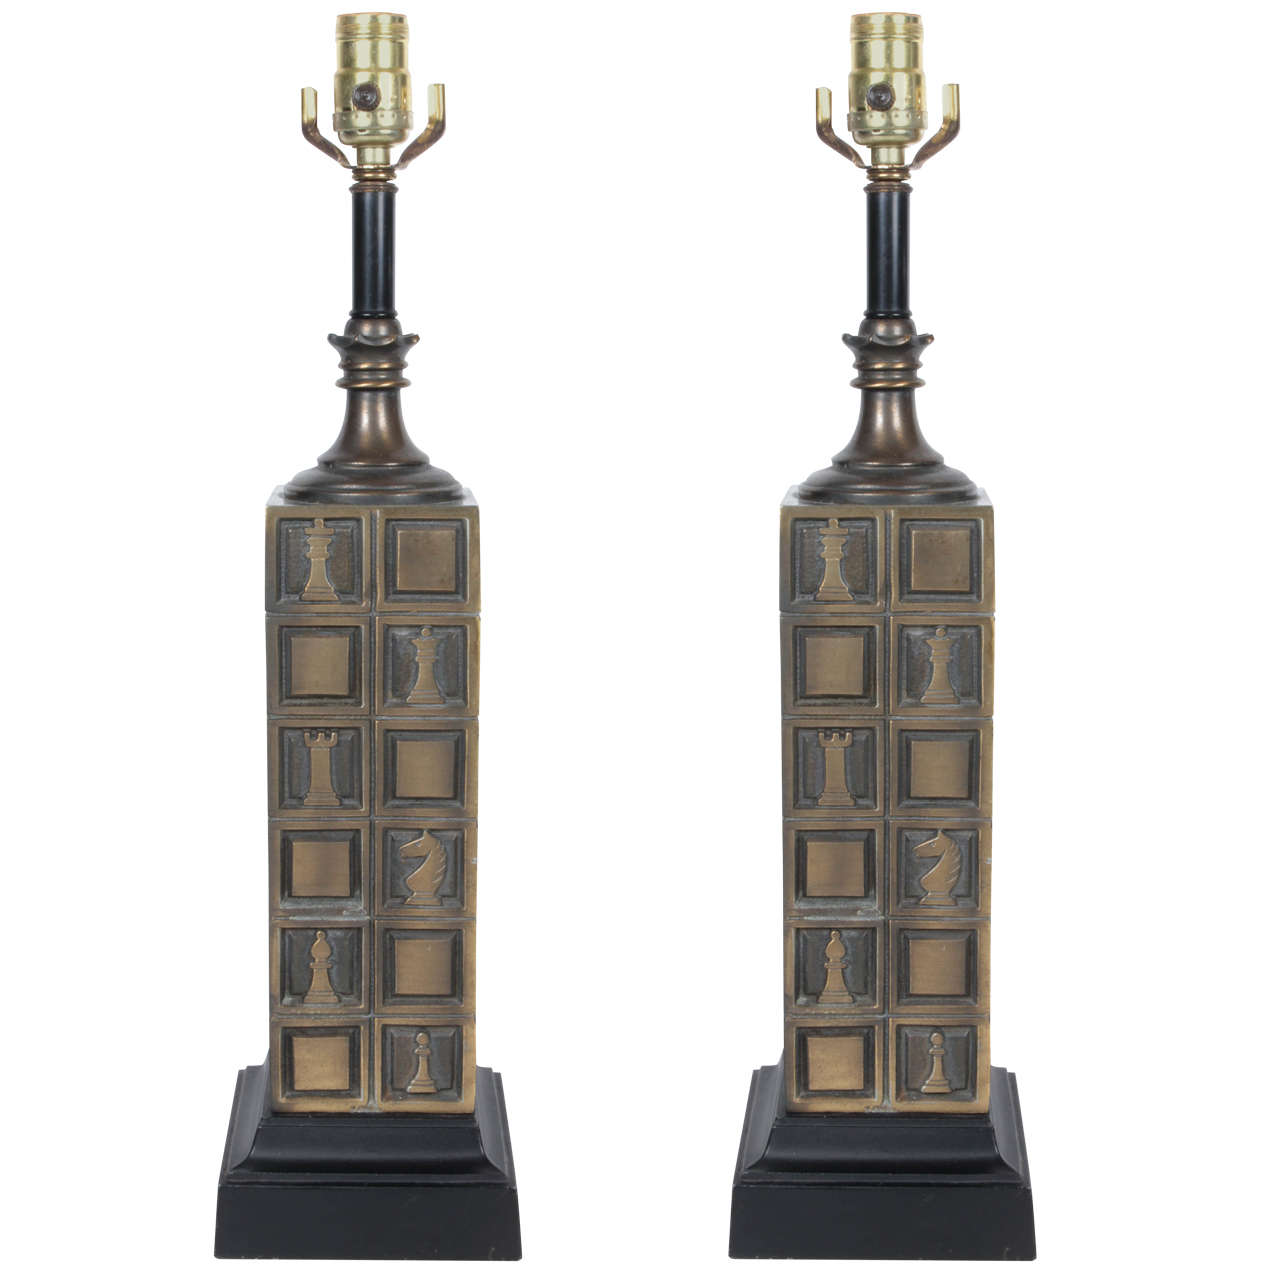 Pair of Brass Chess Lamps by Laurel For Sale